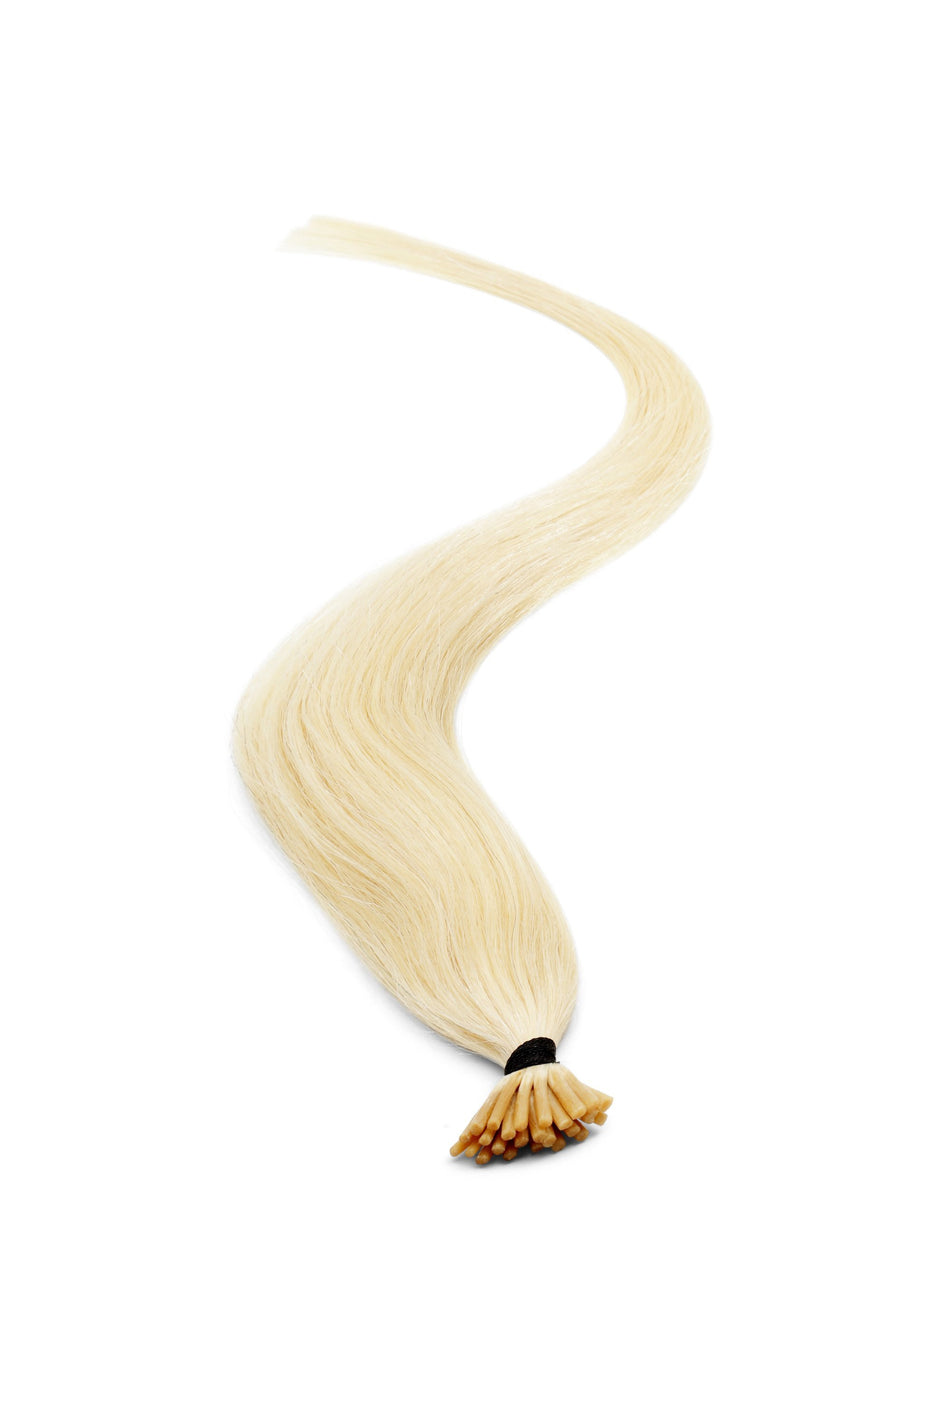 I-Tip Human Hair Extensions 18" Blondest Blonde (60) - Beauty Hair Products LtdHair Extensions